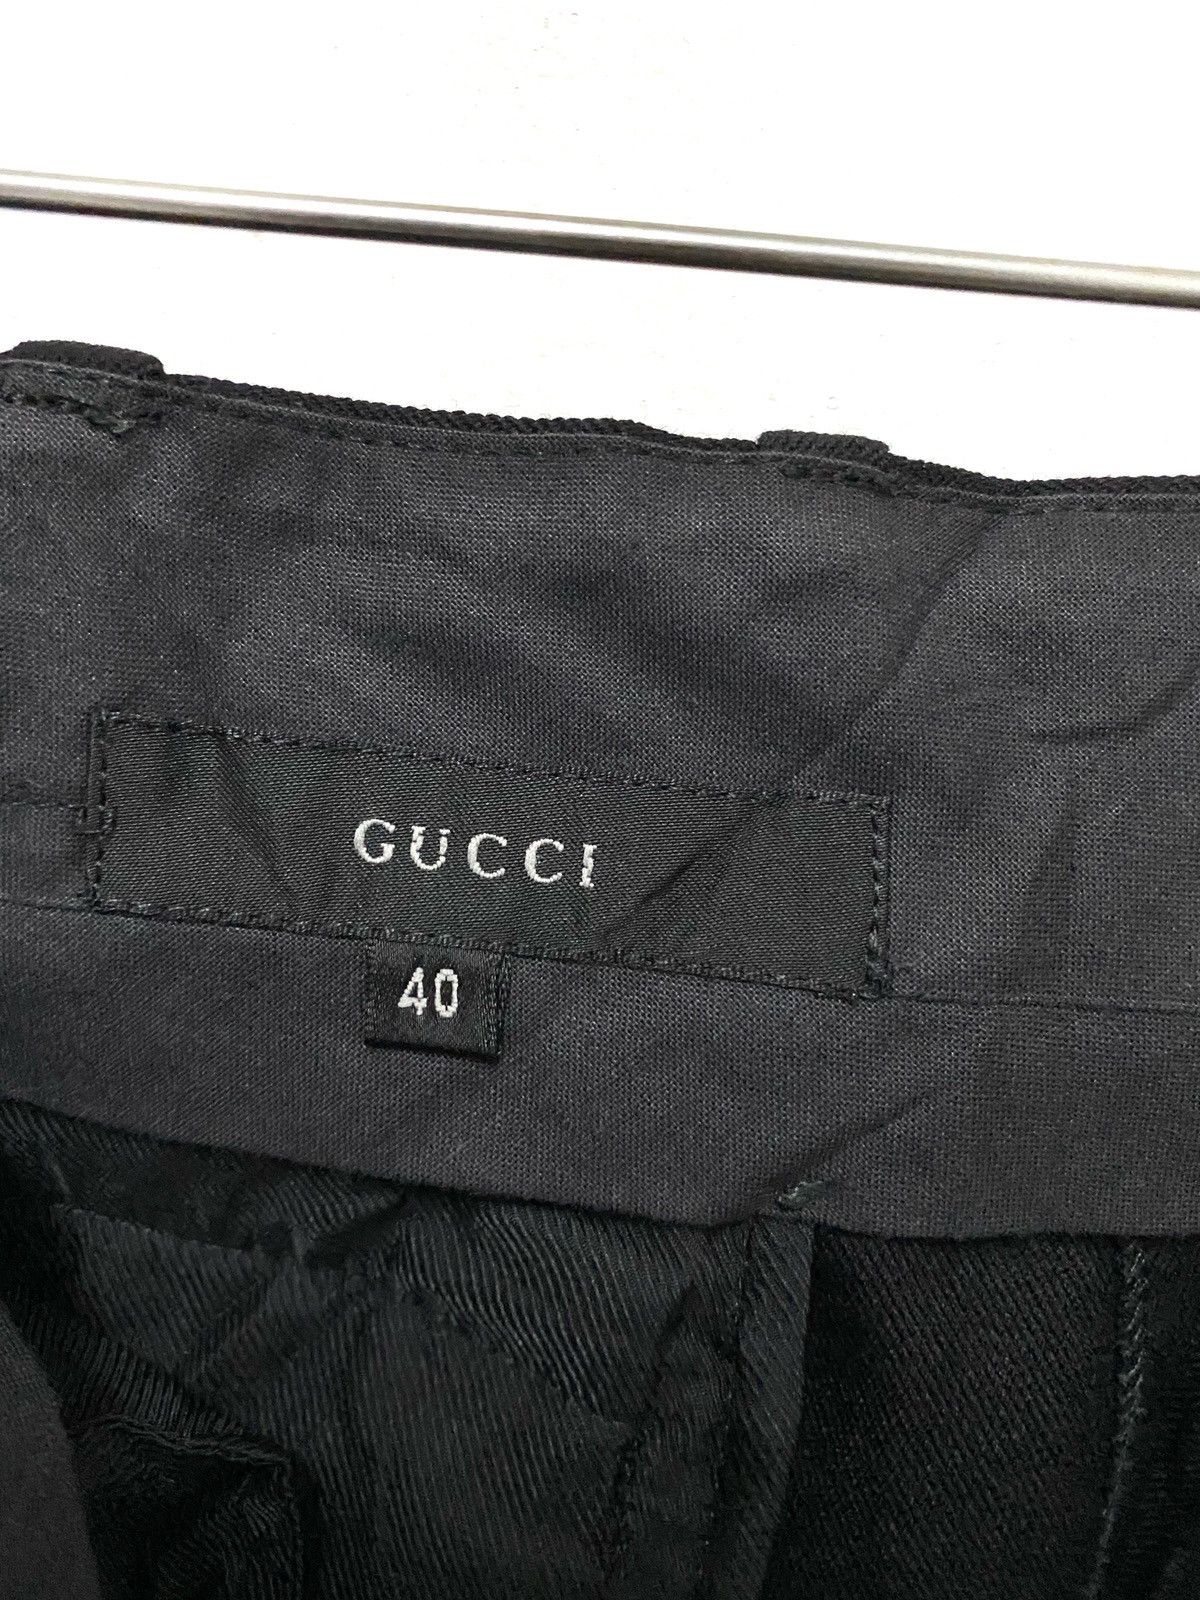 Gucci Lana Wool Pants Made in Italy - 10